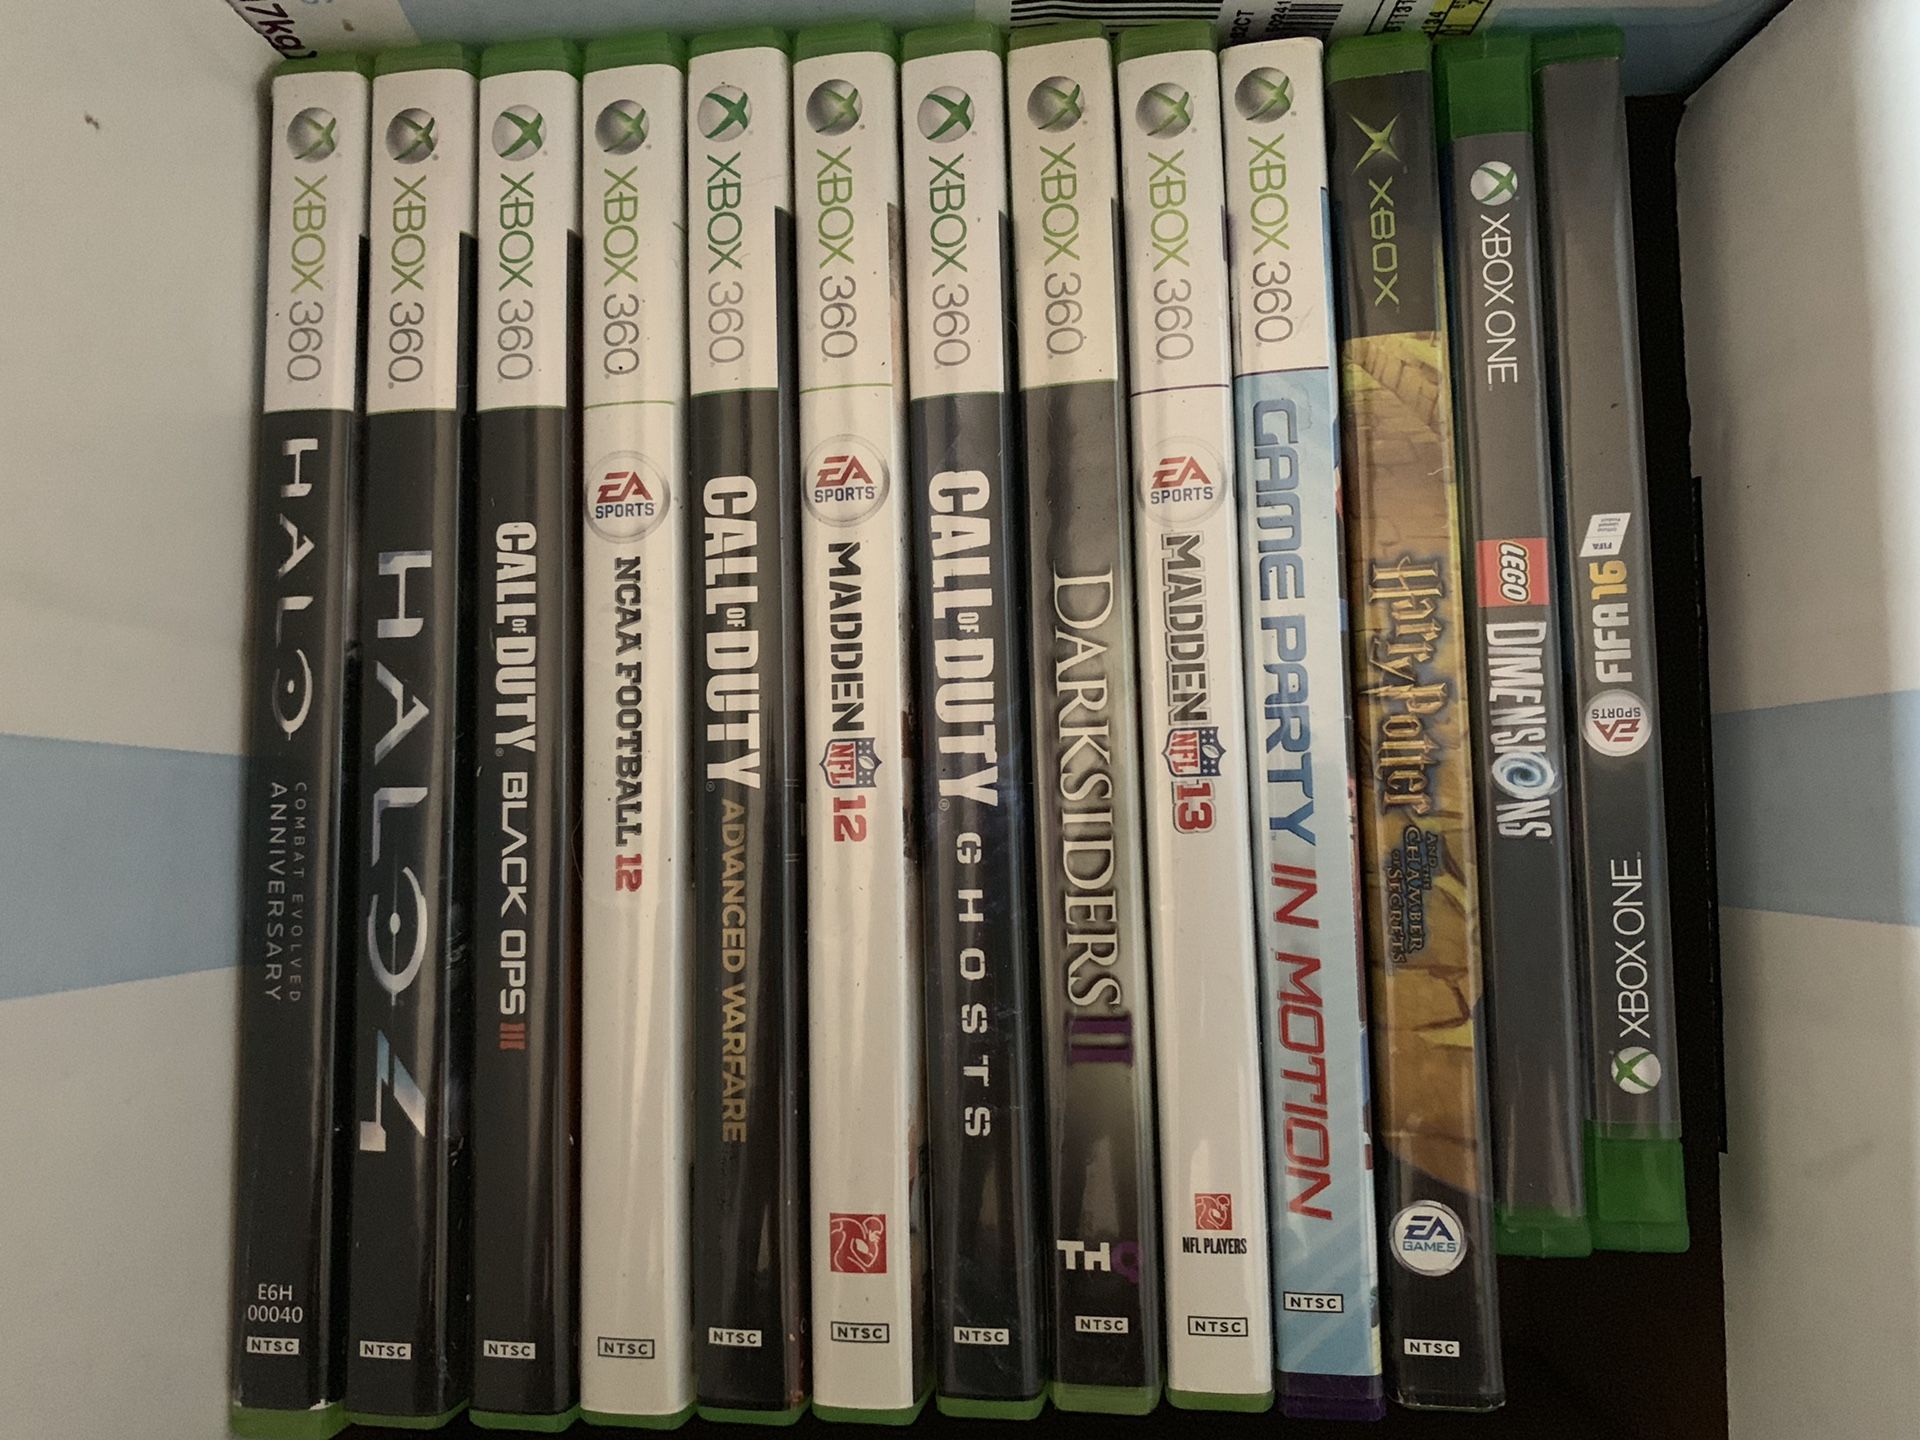 Xbox 360 and Xbox one games . Xbox Kinect and headphones